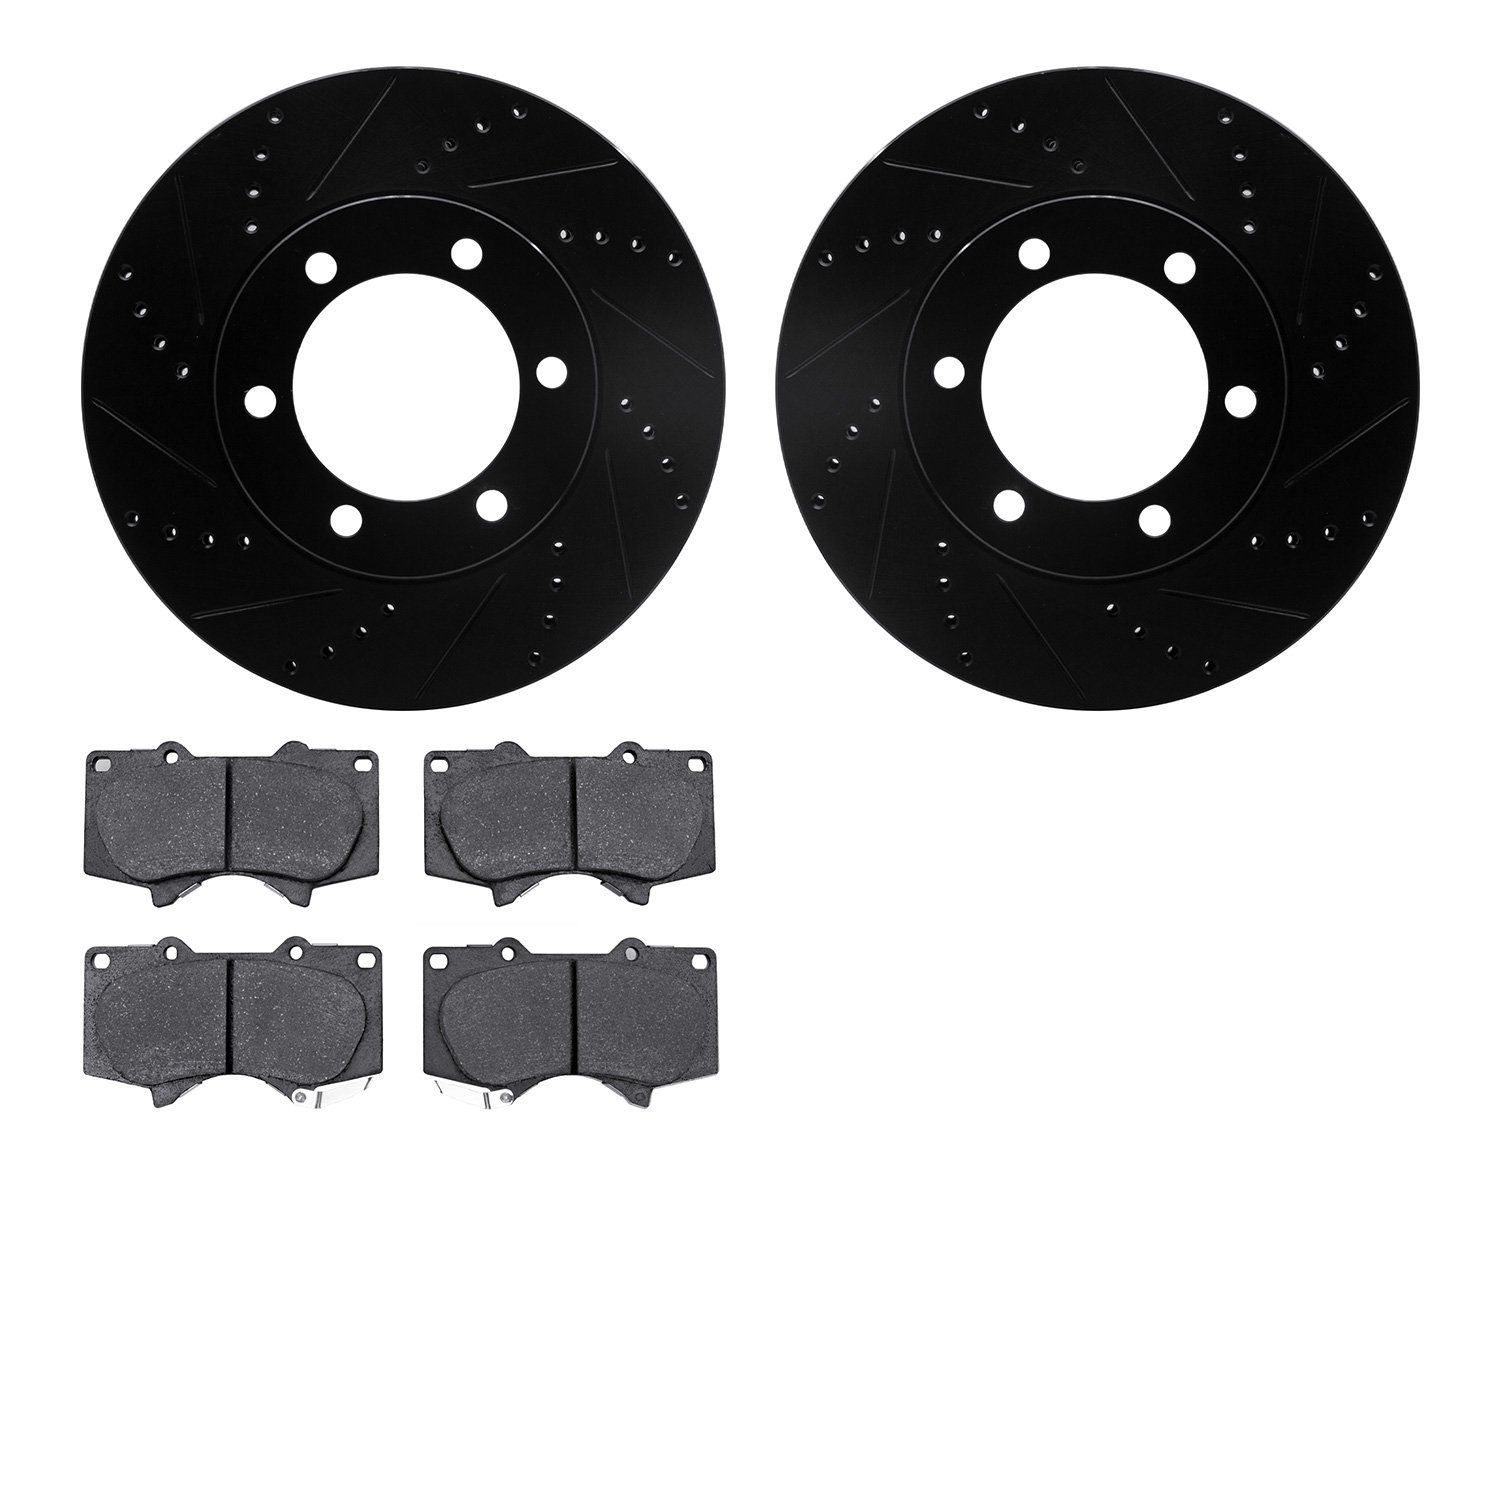 8402-76015 Drilled/Slotted Brake Rotors with Ultimate-Duty Brake Pads Kit [Black], 2000-2007 Lexus/Toyota/Scion, Position: Front